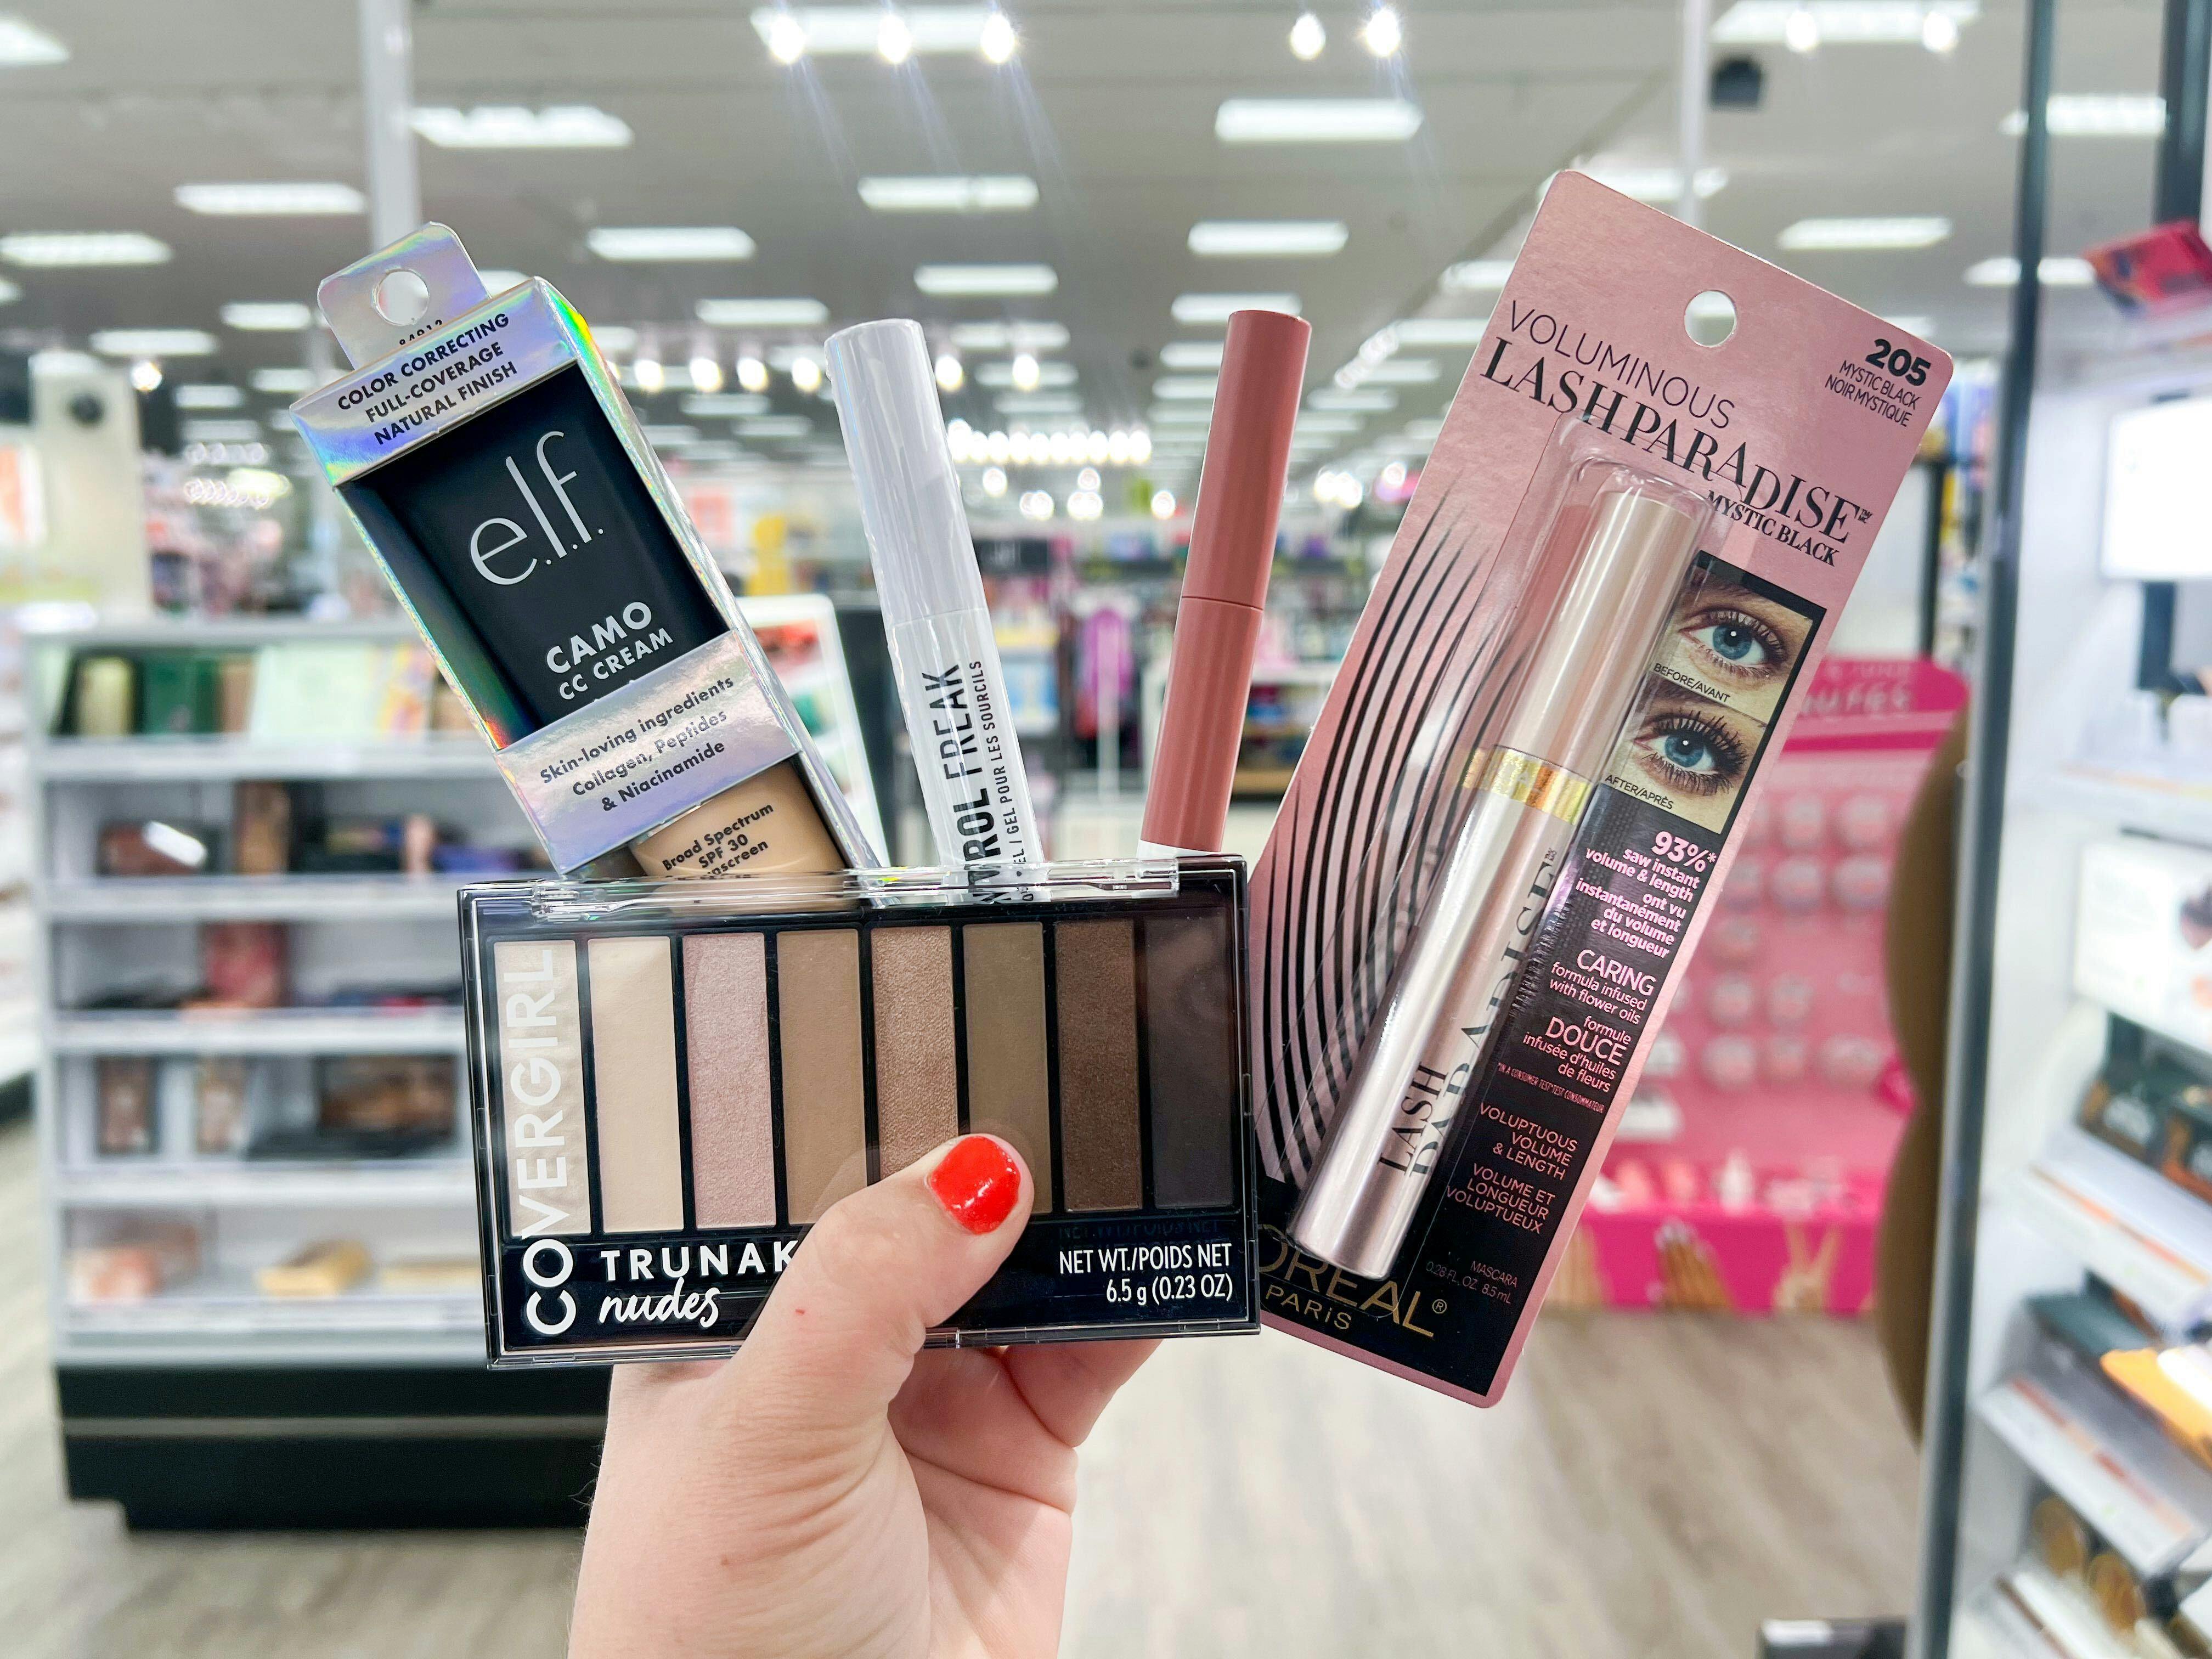 The Best Drugstore Makeup Dupes 2022 - KissThisStyles